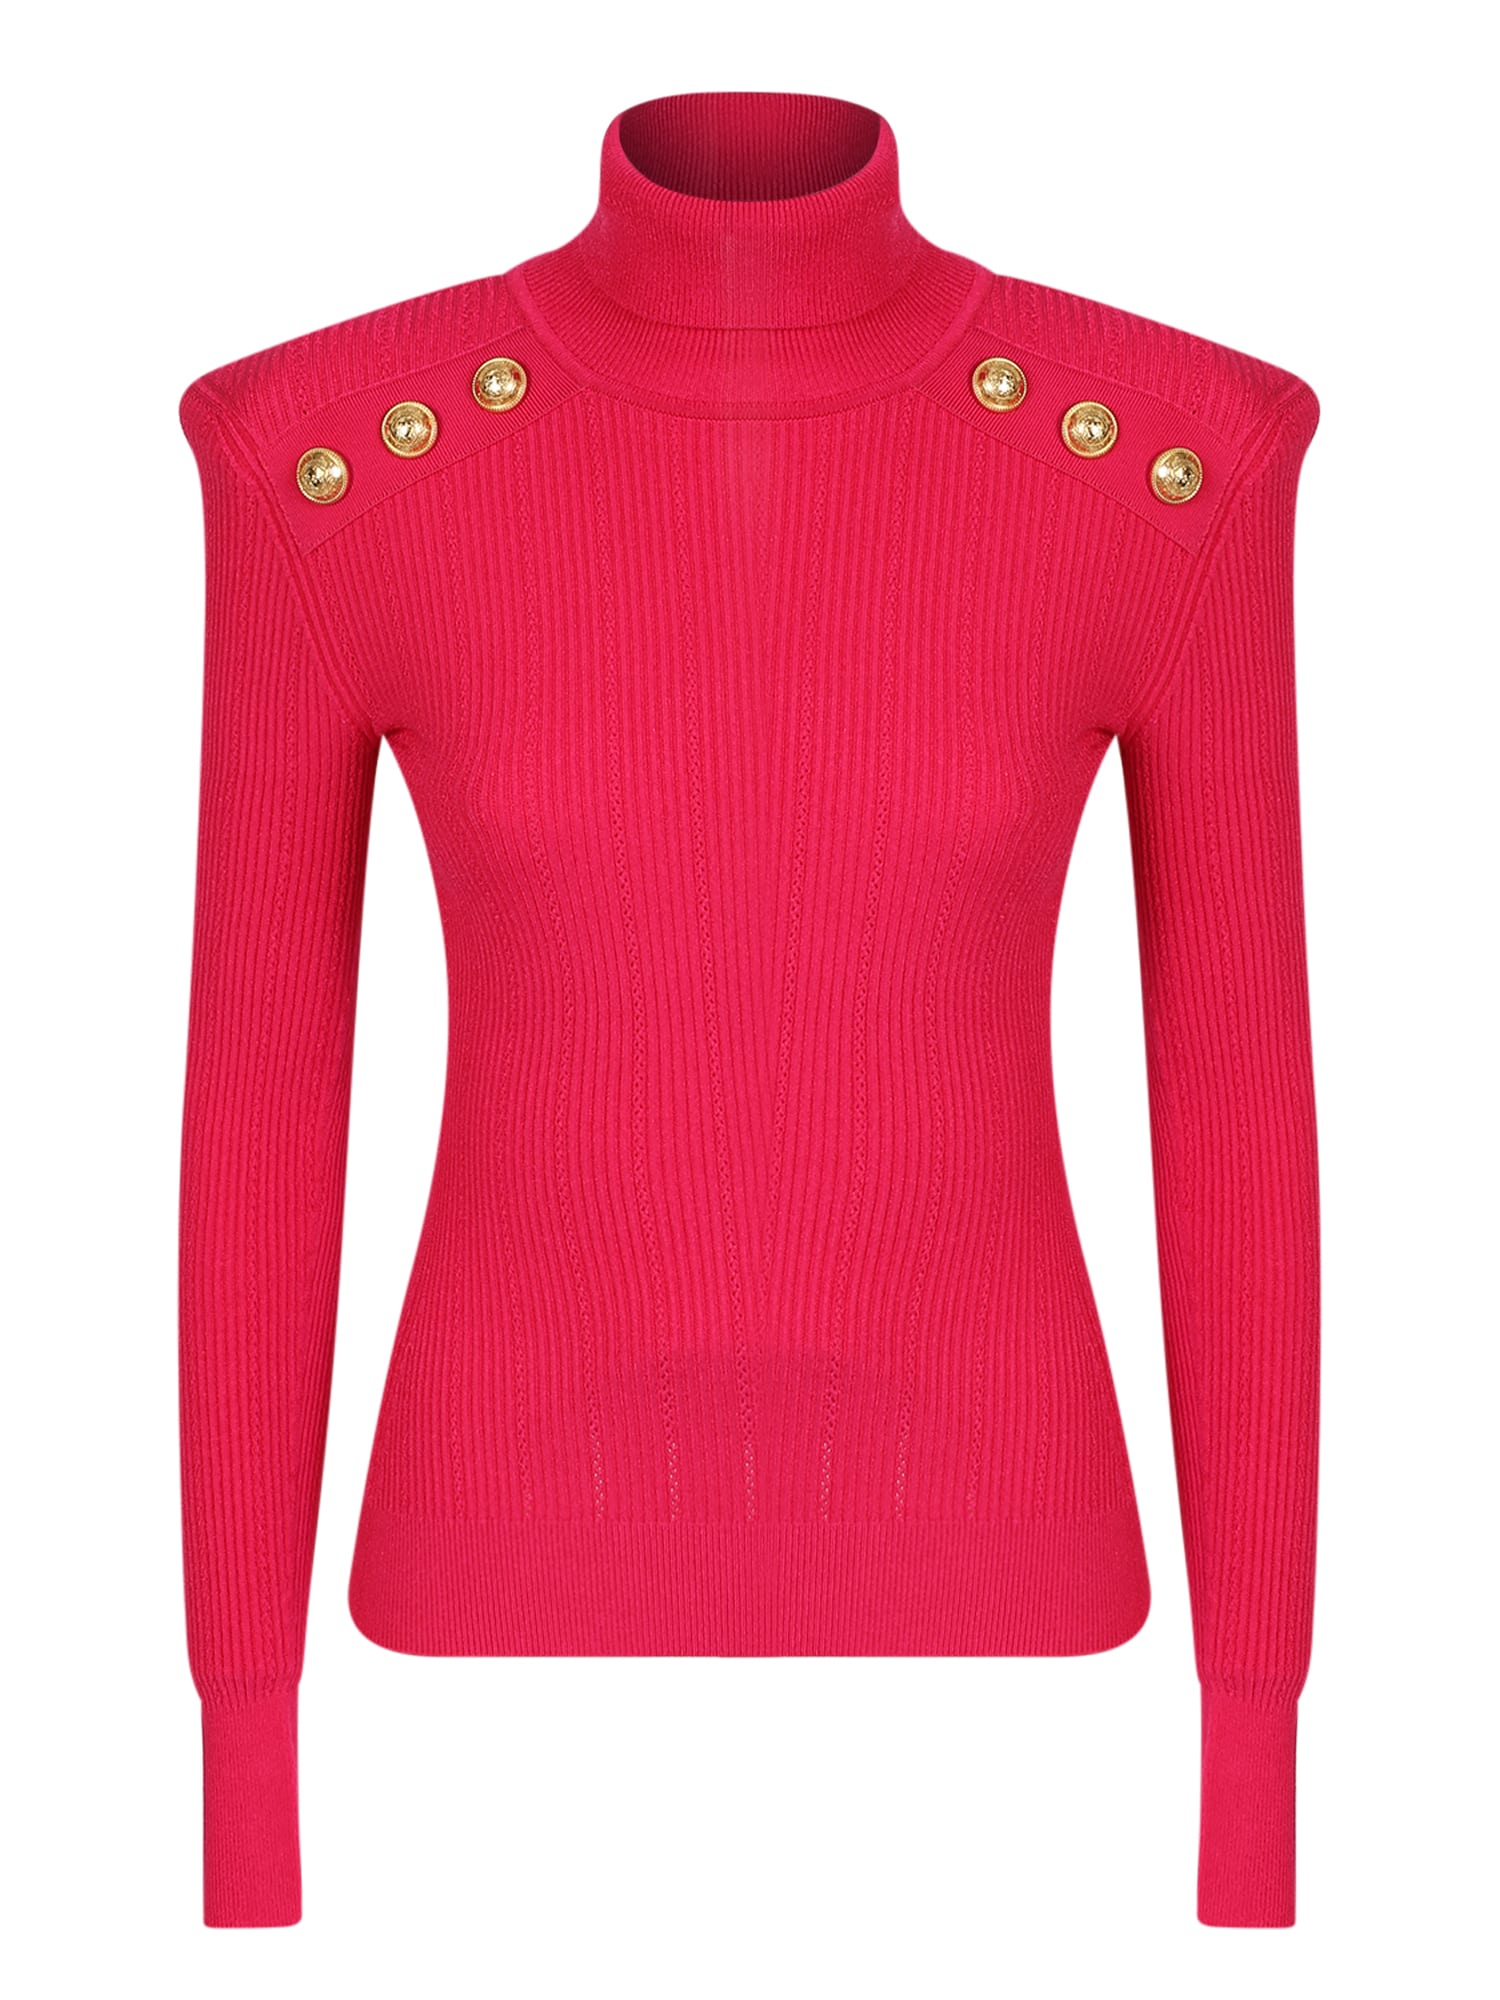 Each Balmain Garment Is Designed And Thought To Be Exclusive And Glamorous, Like This Sweater With Padded Shoulders And Roll Neck